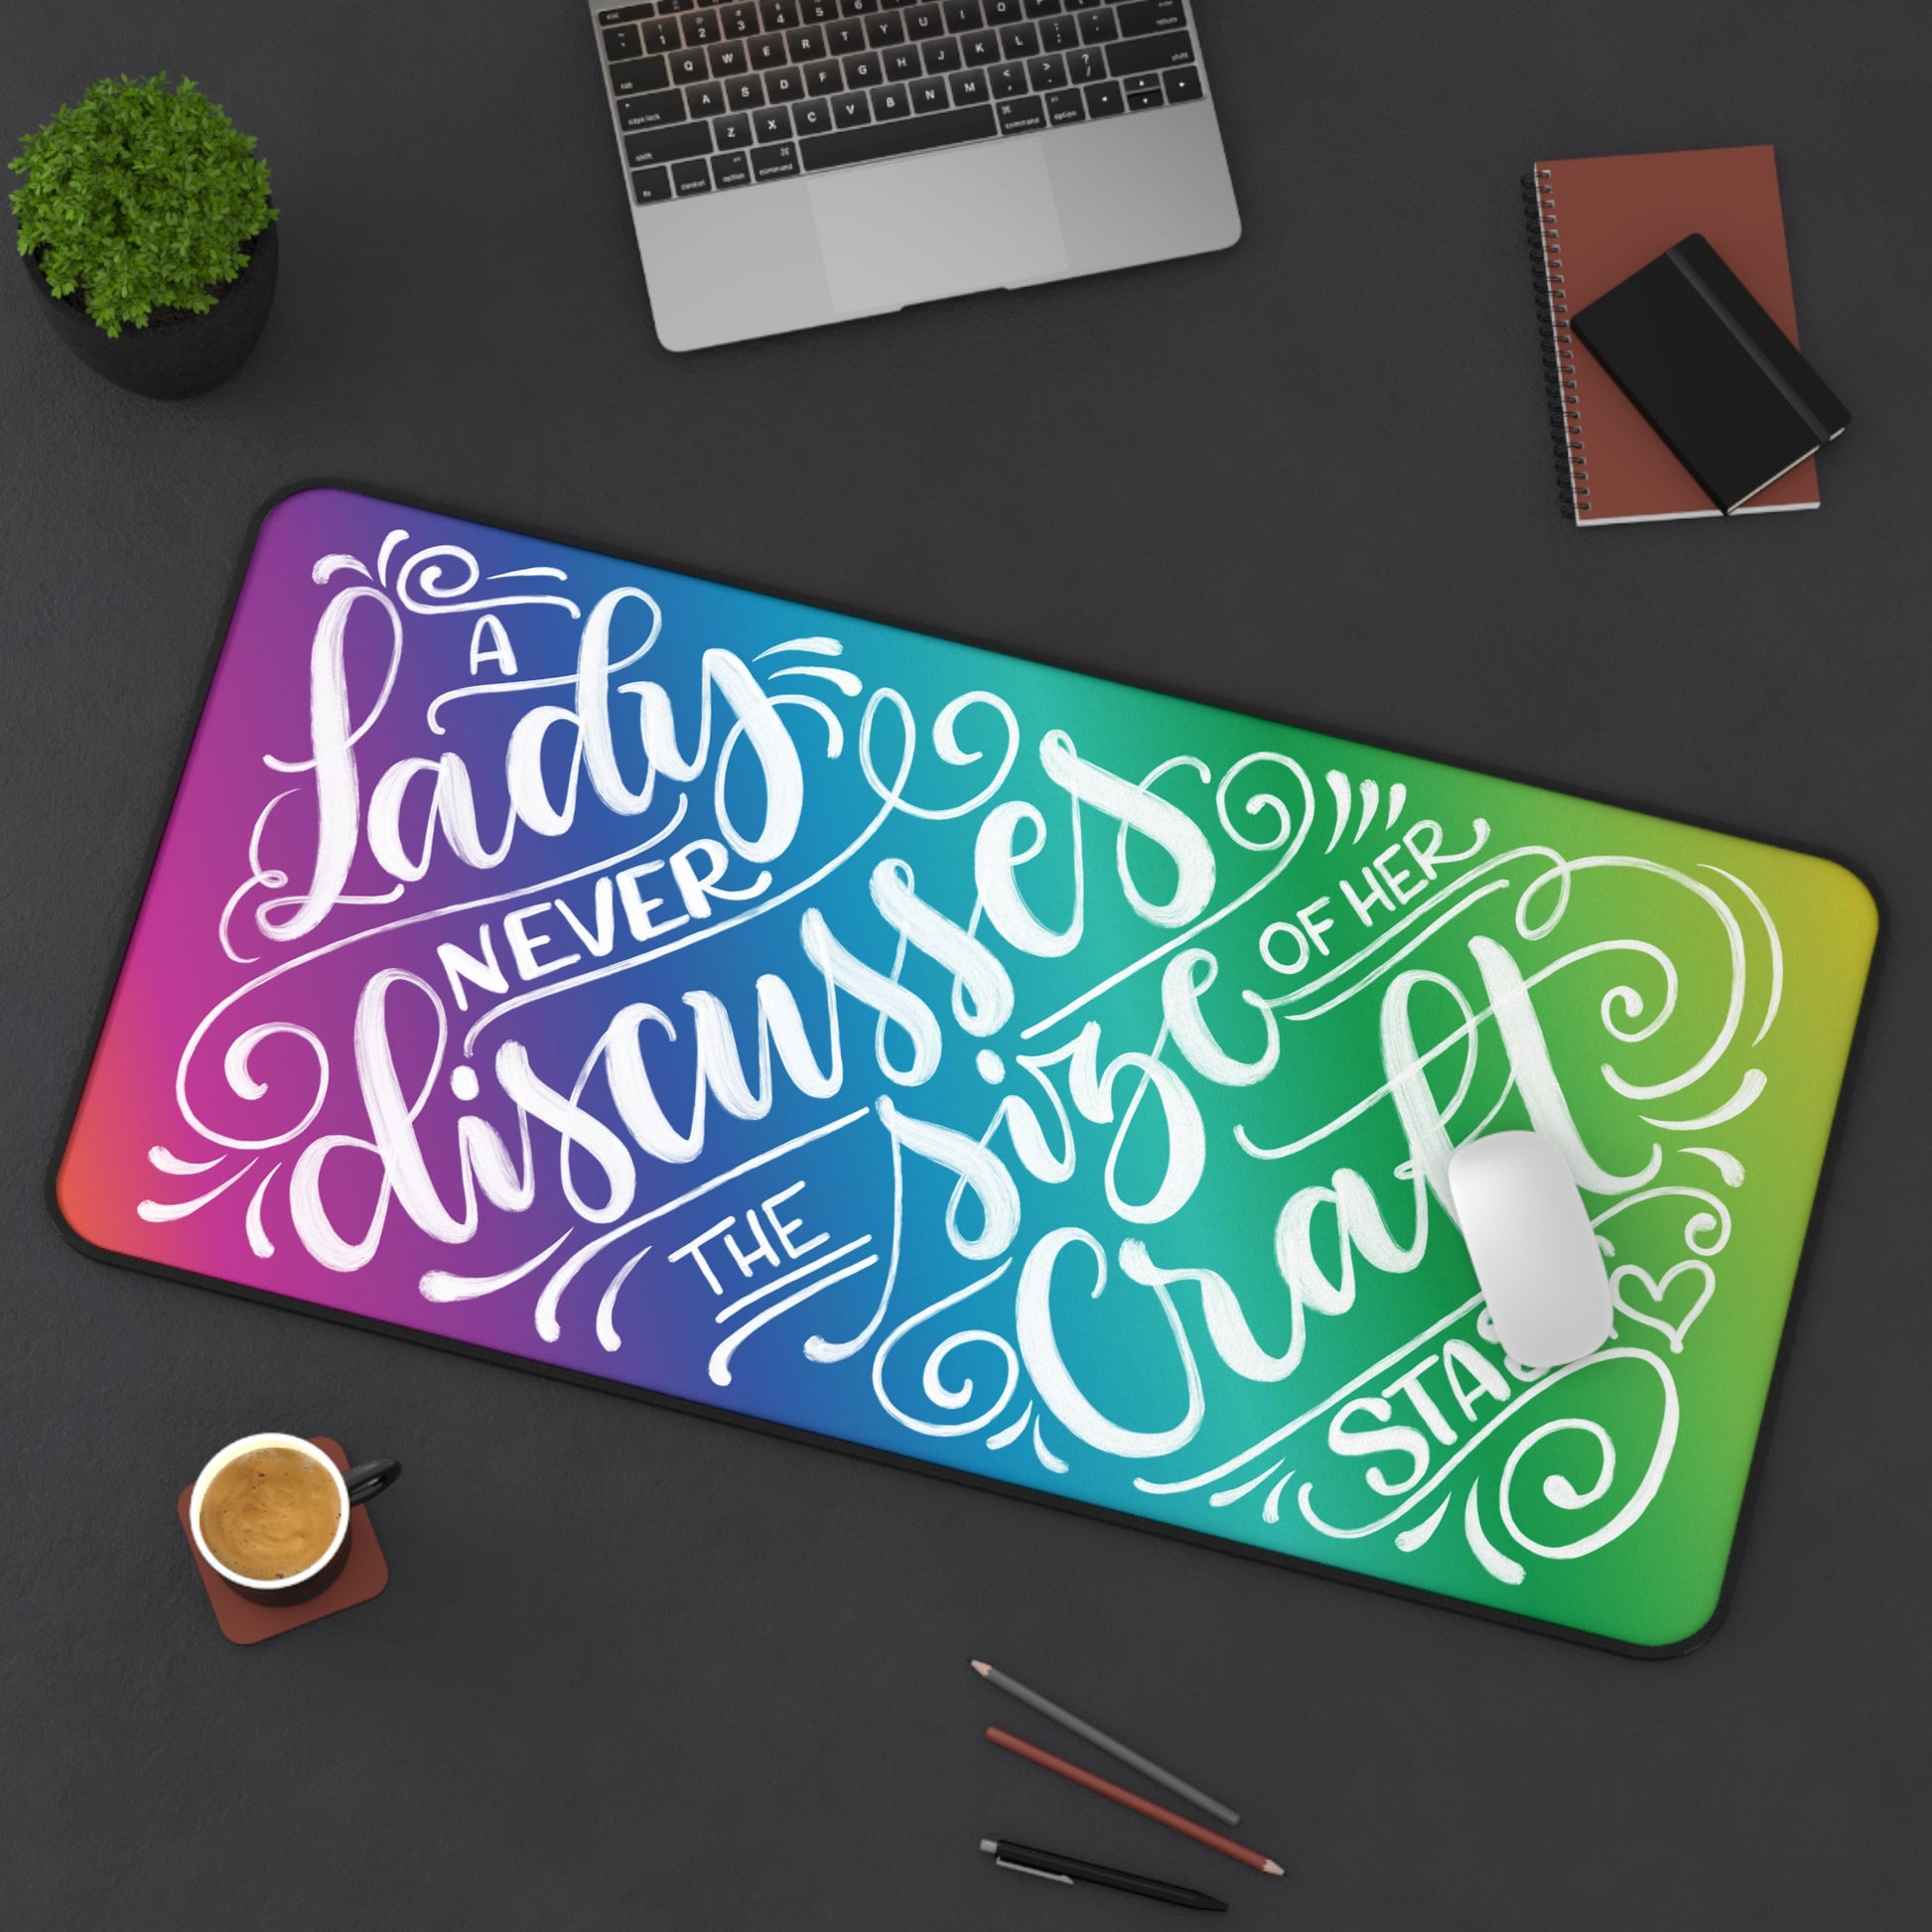 A lady never discusses the size of her craft stash - Rainbow - Desk Mat - howjoyfulshop